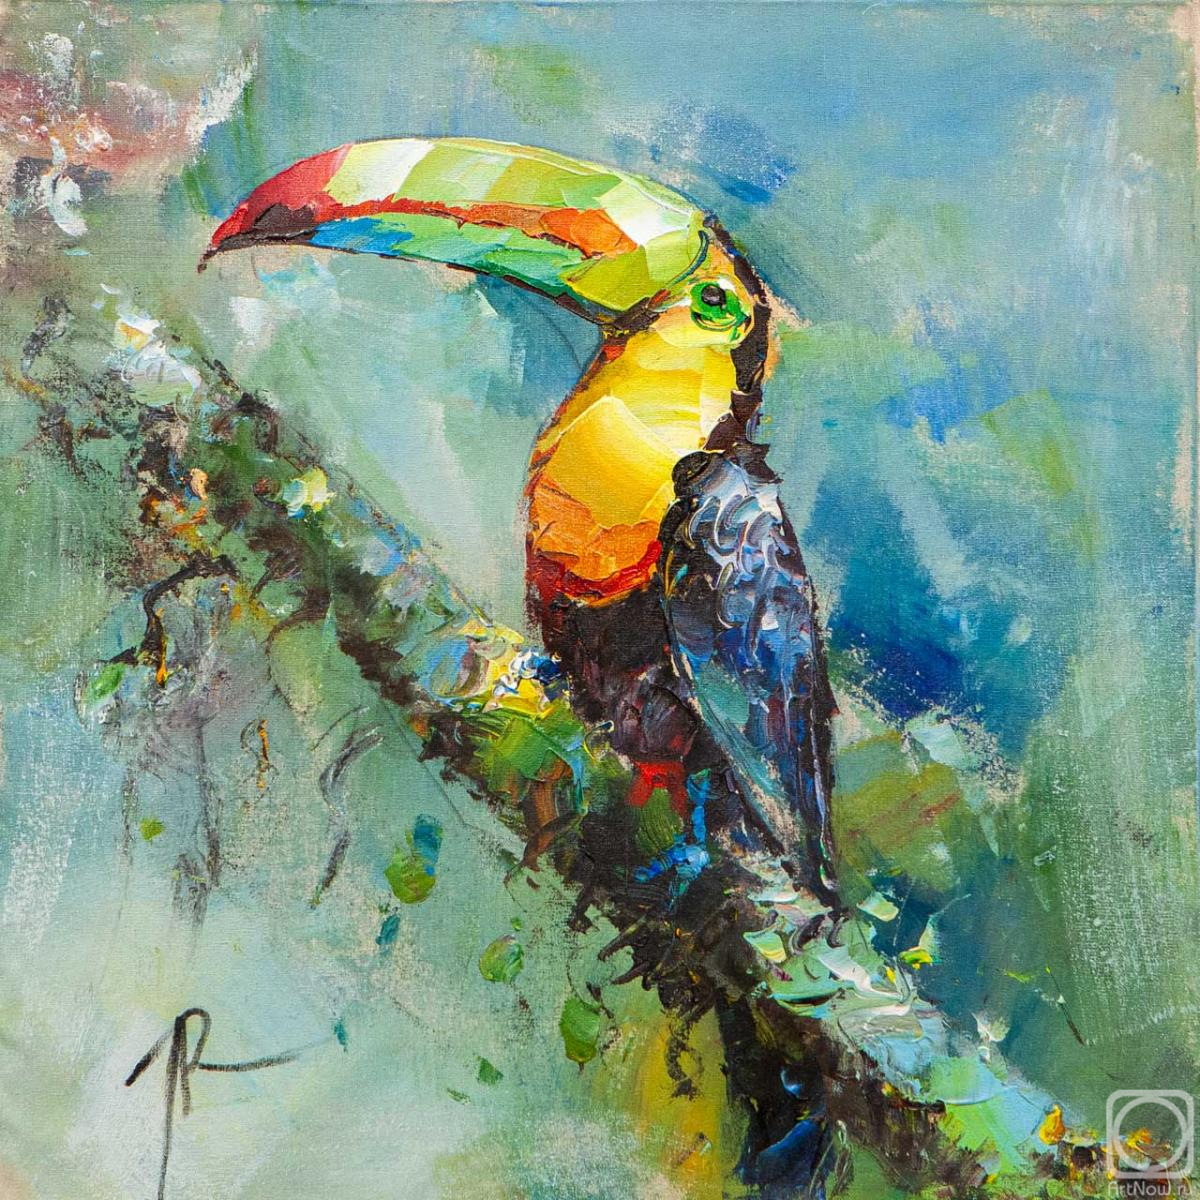 Rodries Jose. Toucan. In the rainforest